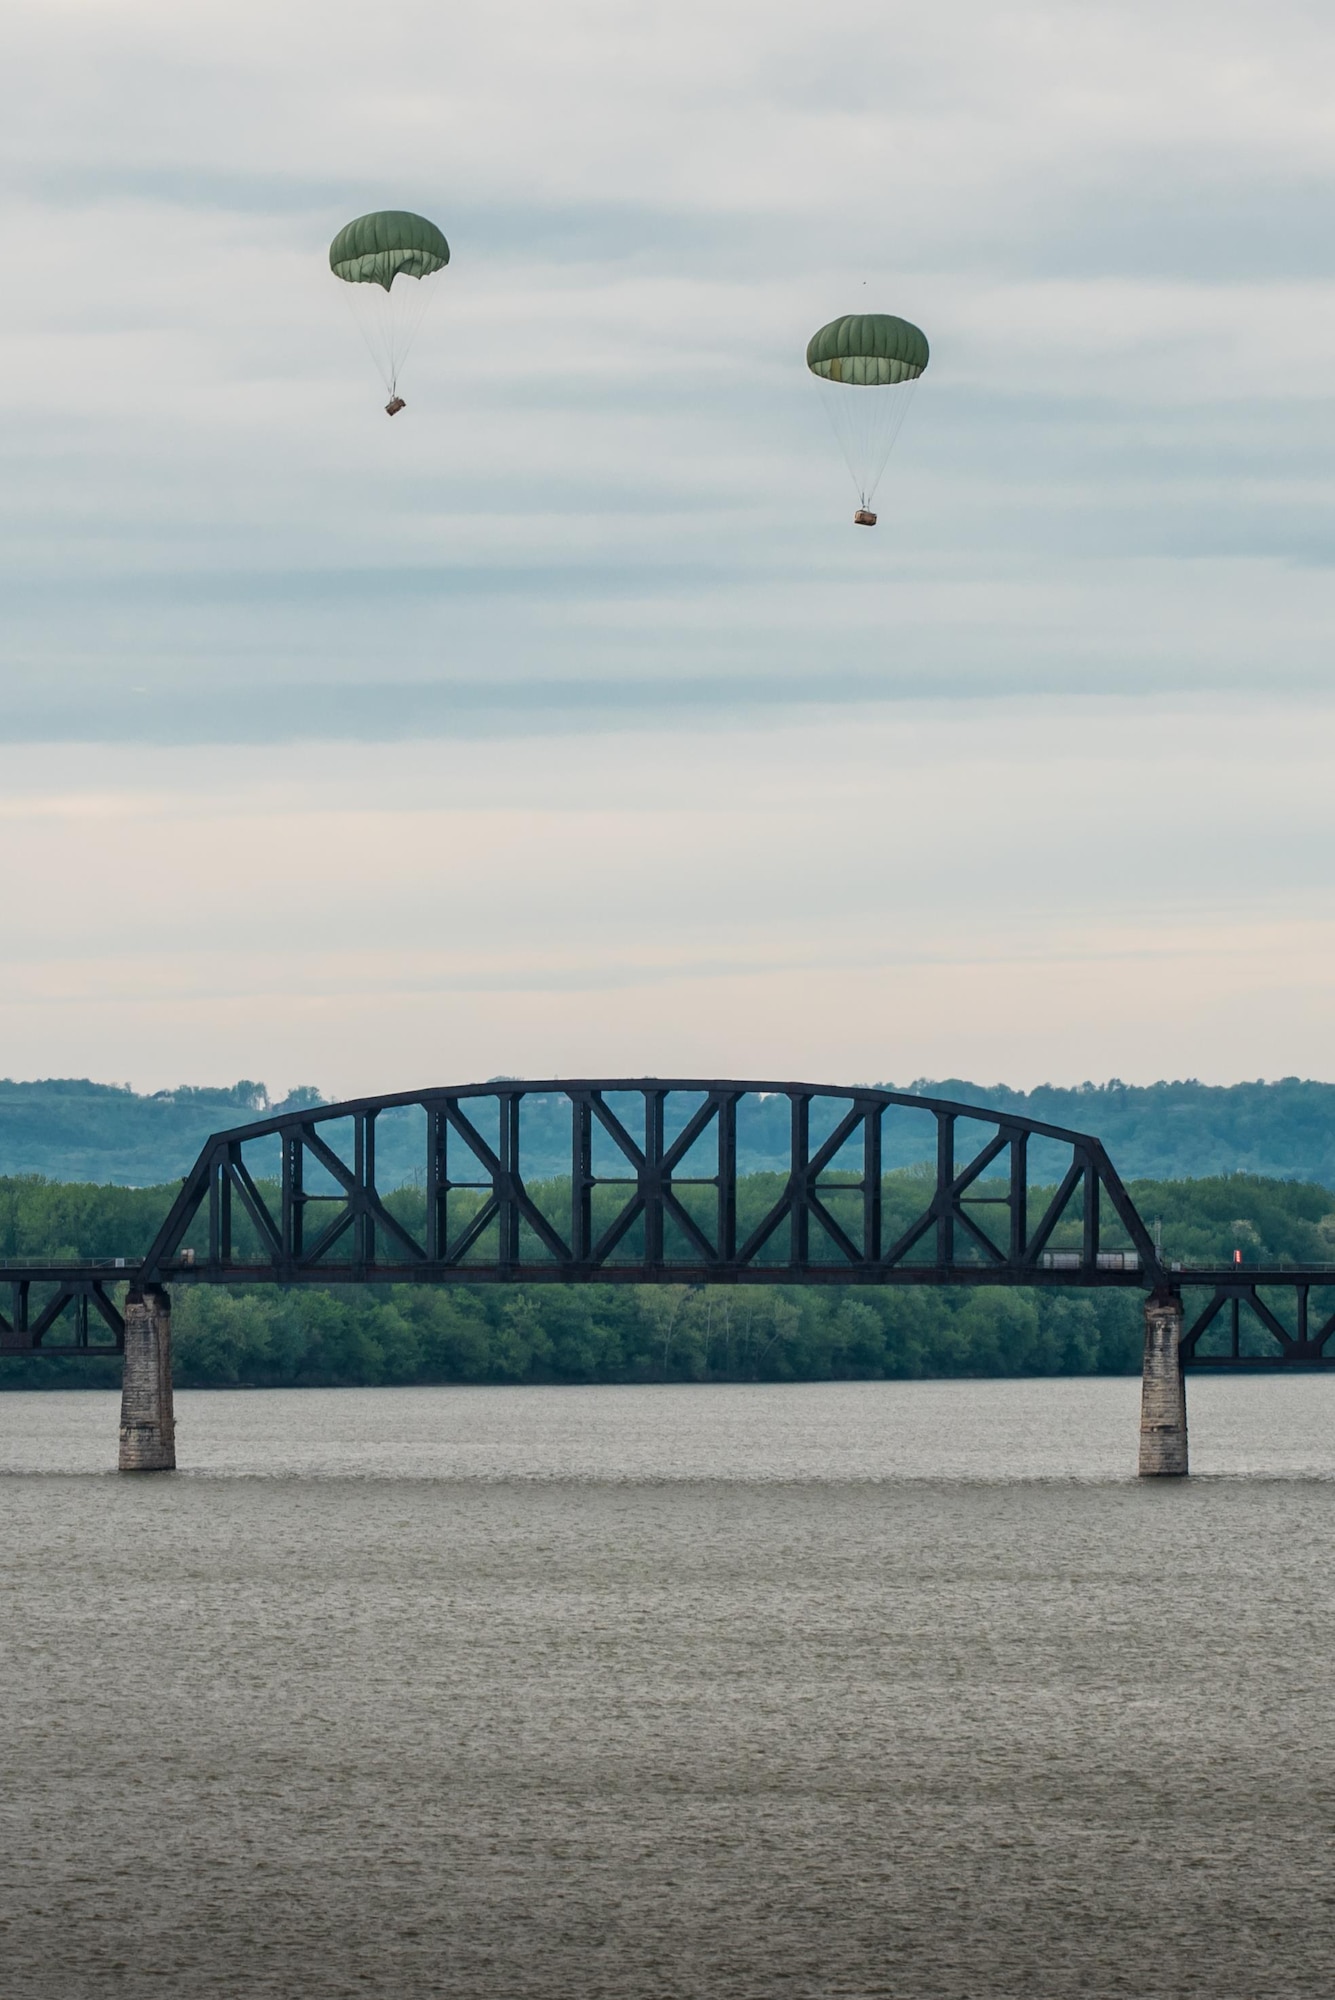 Two bundles of cargo float down to the Ohio River after being air-dropped from a Kentucky Air National Guard C-130 Hercules aircraft April 22, 2017, during the Thunder Over Louisville air show in Louisville, Ky. The annual event has grown to become the largest single-day air show in the nation. (U.S. Air National Guard photo by Lt. Col. Dale Greer)